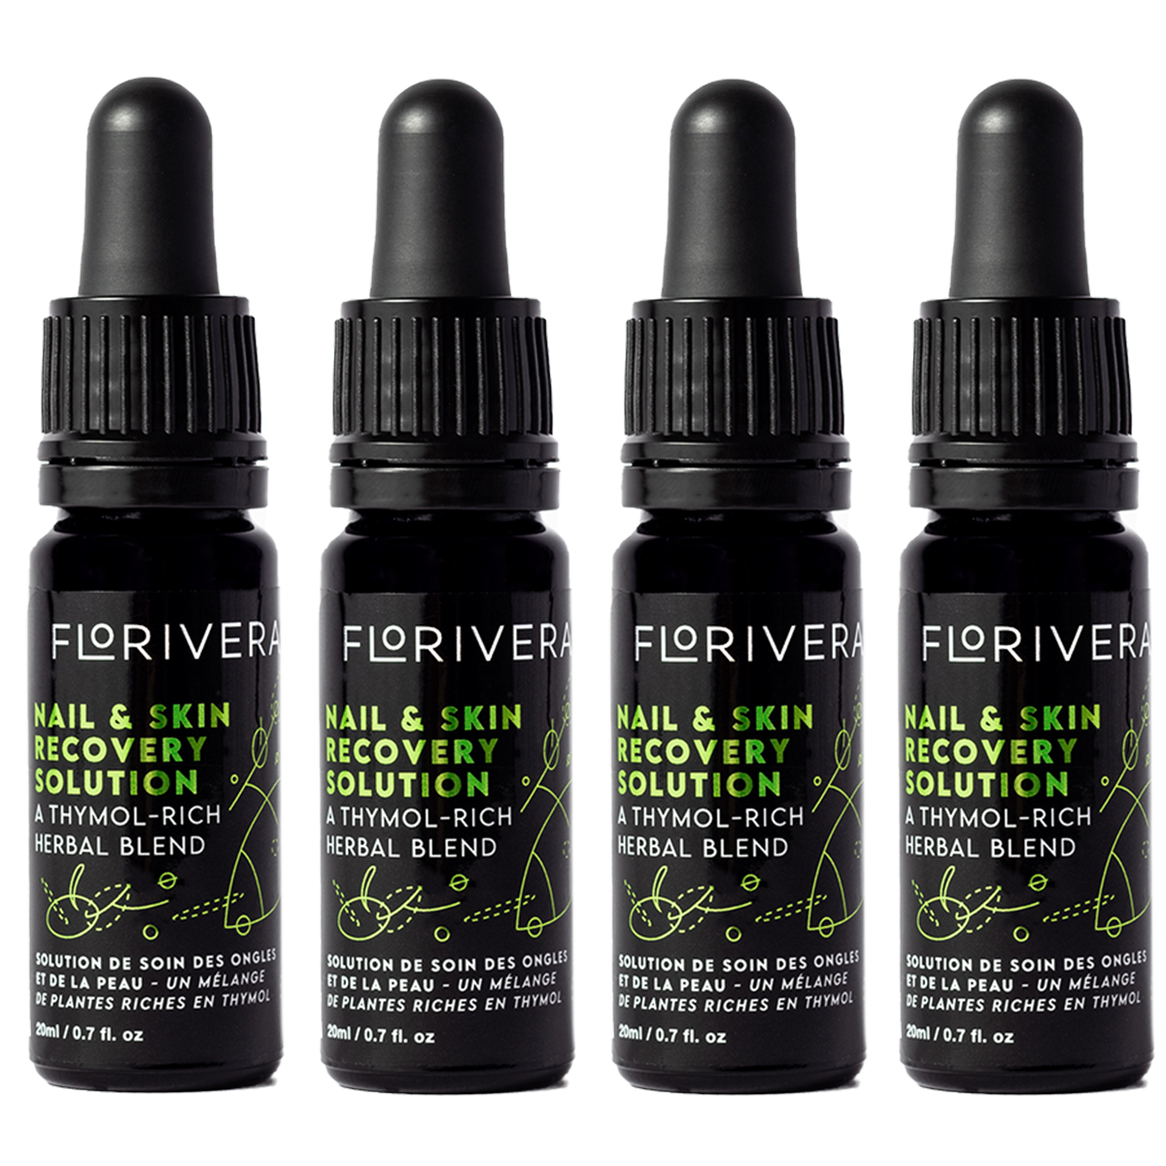 Florivera Online Exclusive - Nail & Skin Recovery Solution